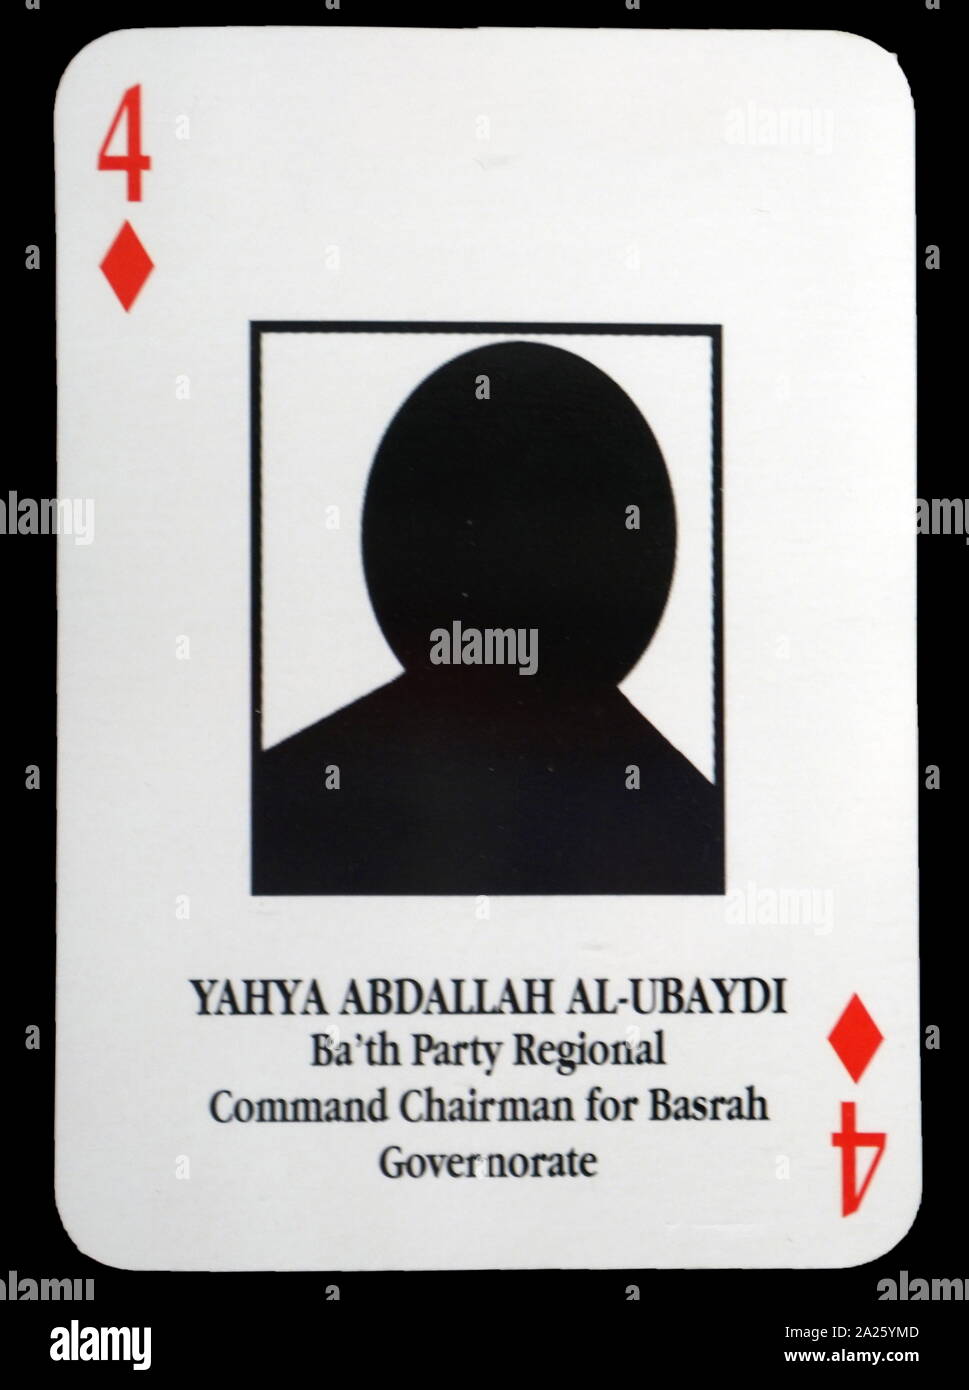 Most-wanted Iraqi playing cards - Yahya Abdallah Al-Ubaydi (Ba'th Party Regional Command Chairman for Basrah Governorate). The U.S. military developed a set of playing cards to help troop identify the most-wanted members of President Saddam Hussein's government during the 2003 invasion of Iraq. Stock Photo